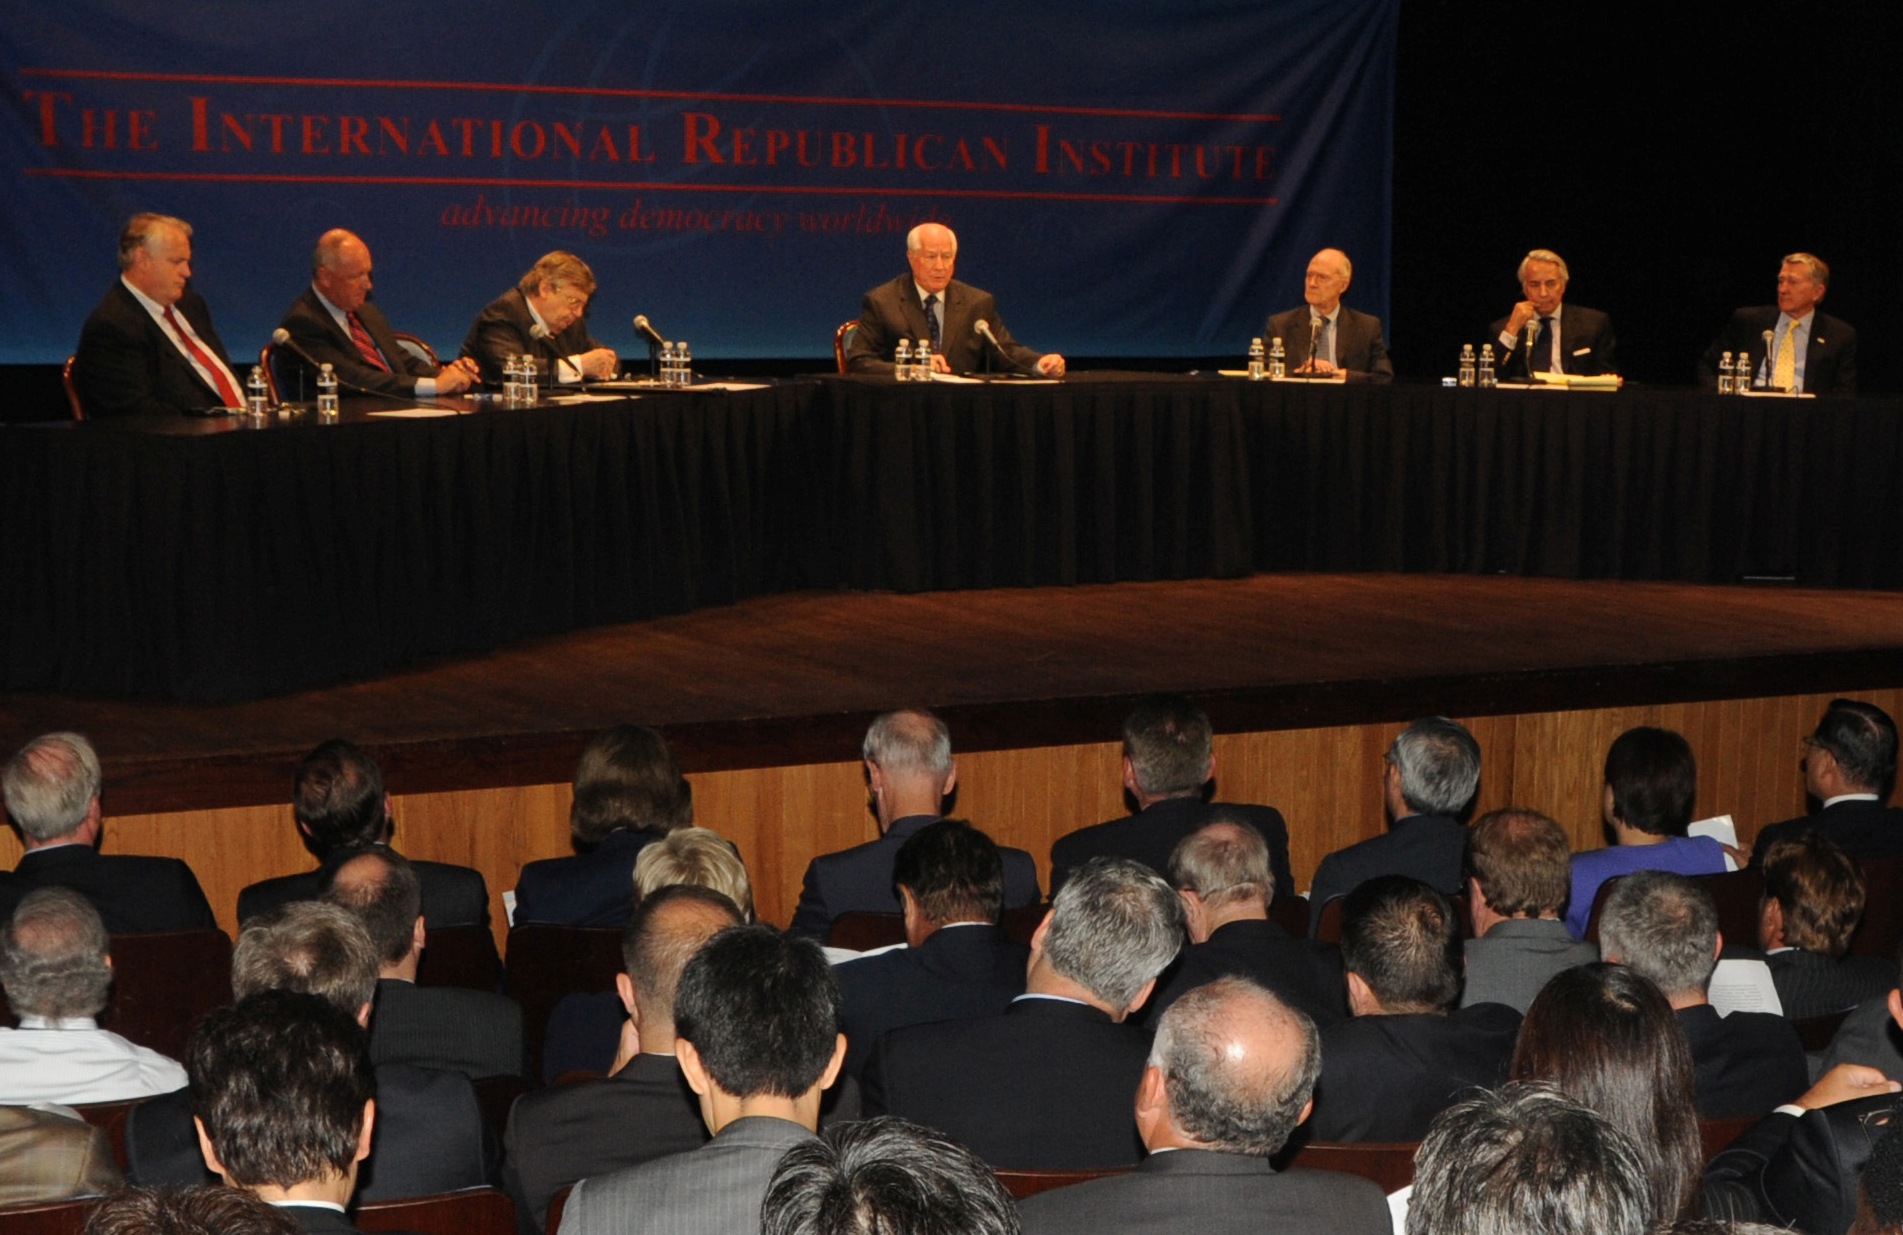 Panelists discuss U.S. foreign policy.